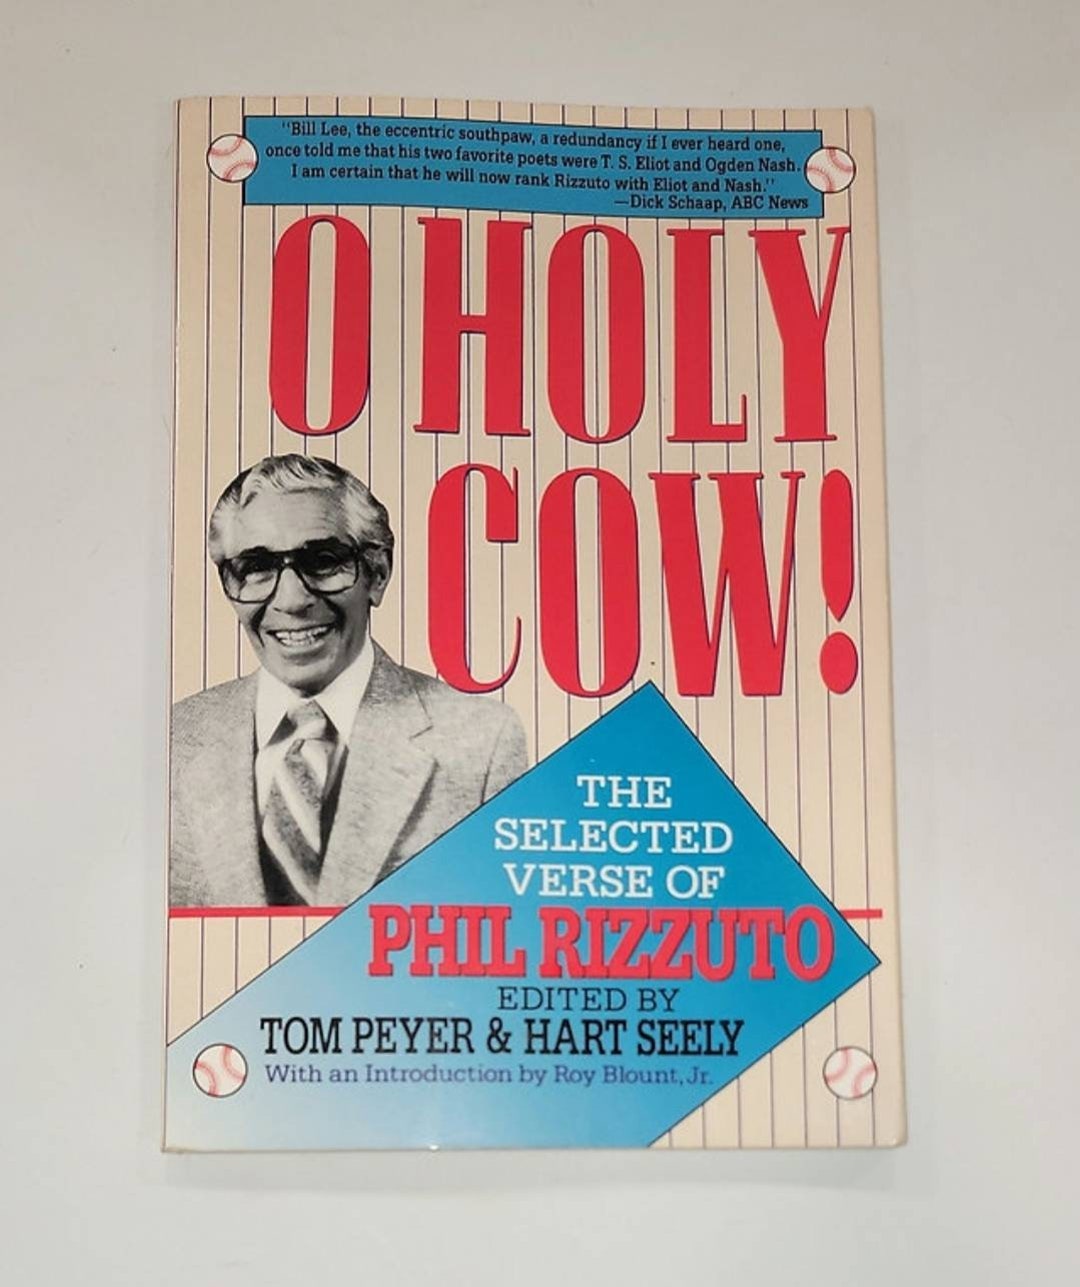 O Holy Cow: the Selected Verse of Phil Rizzuto Paperback 